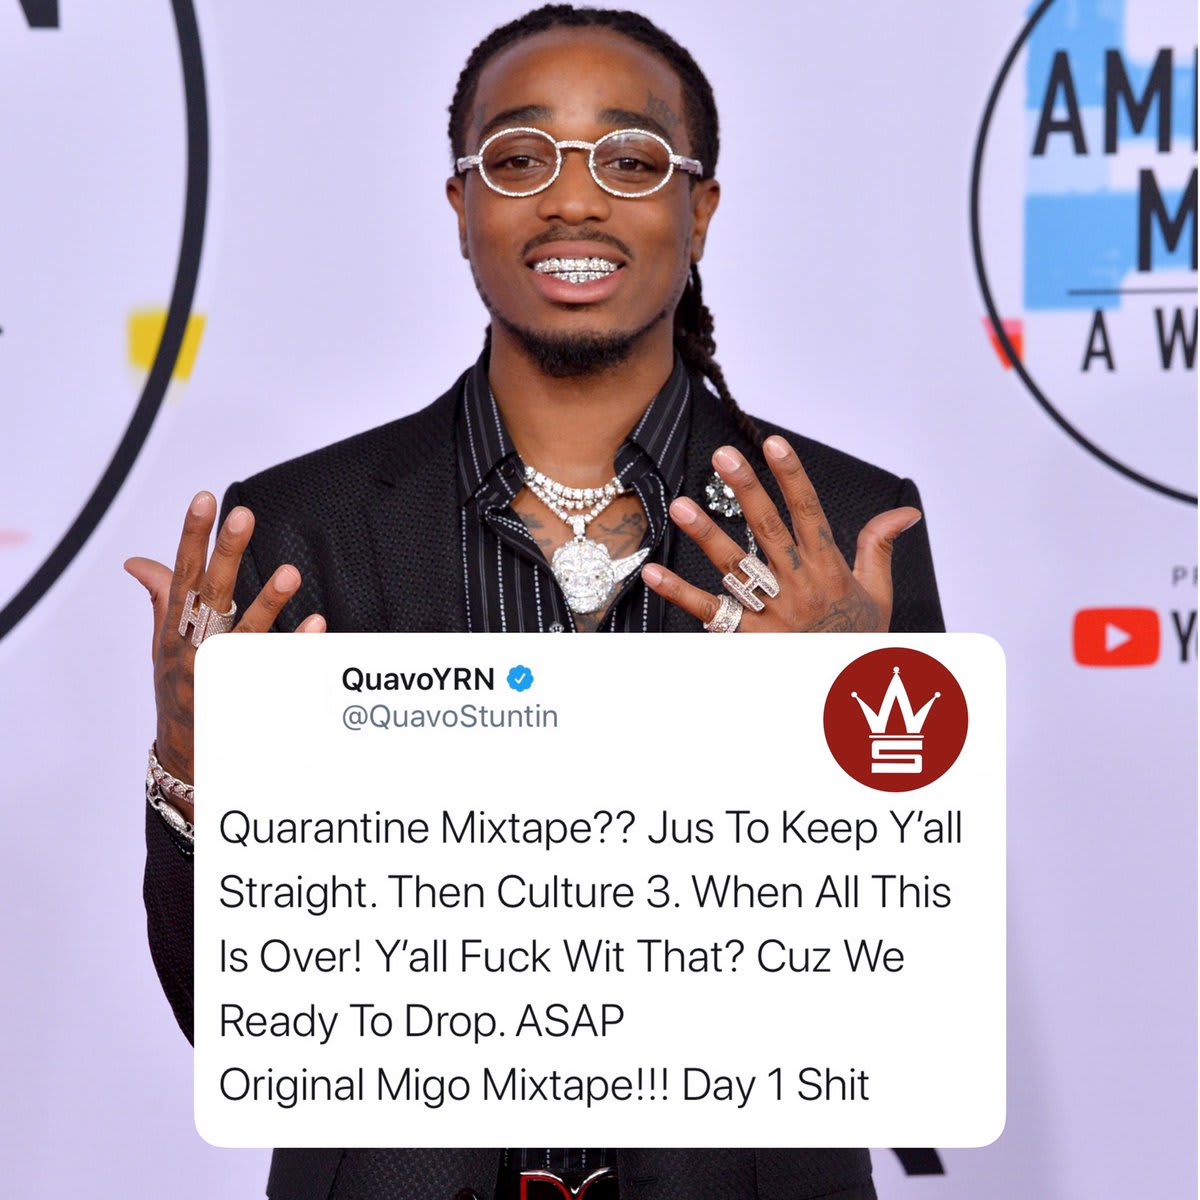 Quavo says Migos will he dropping a mixtape soon followed by “Culture 3” once the coronavirus pandemic is over! Y’all looking forward to it? 👇🎶🙌